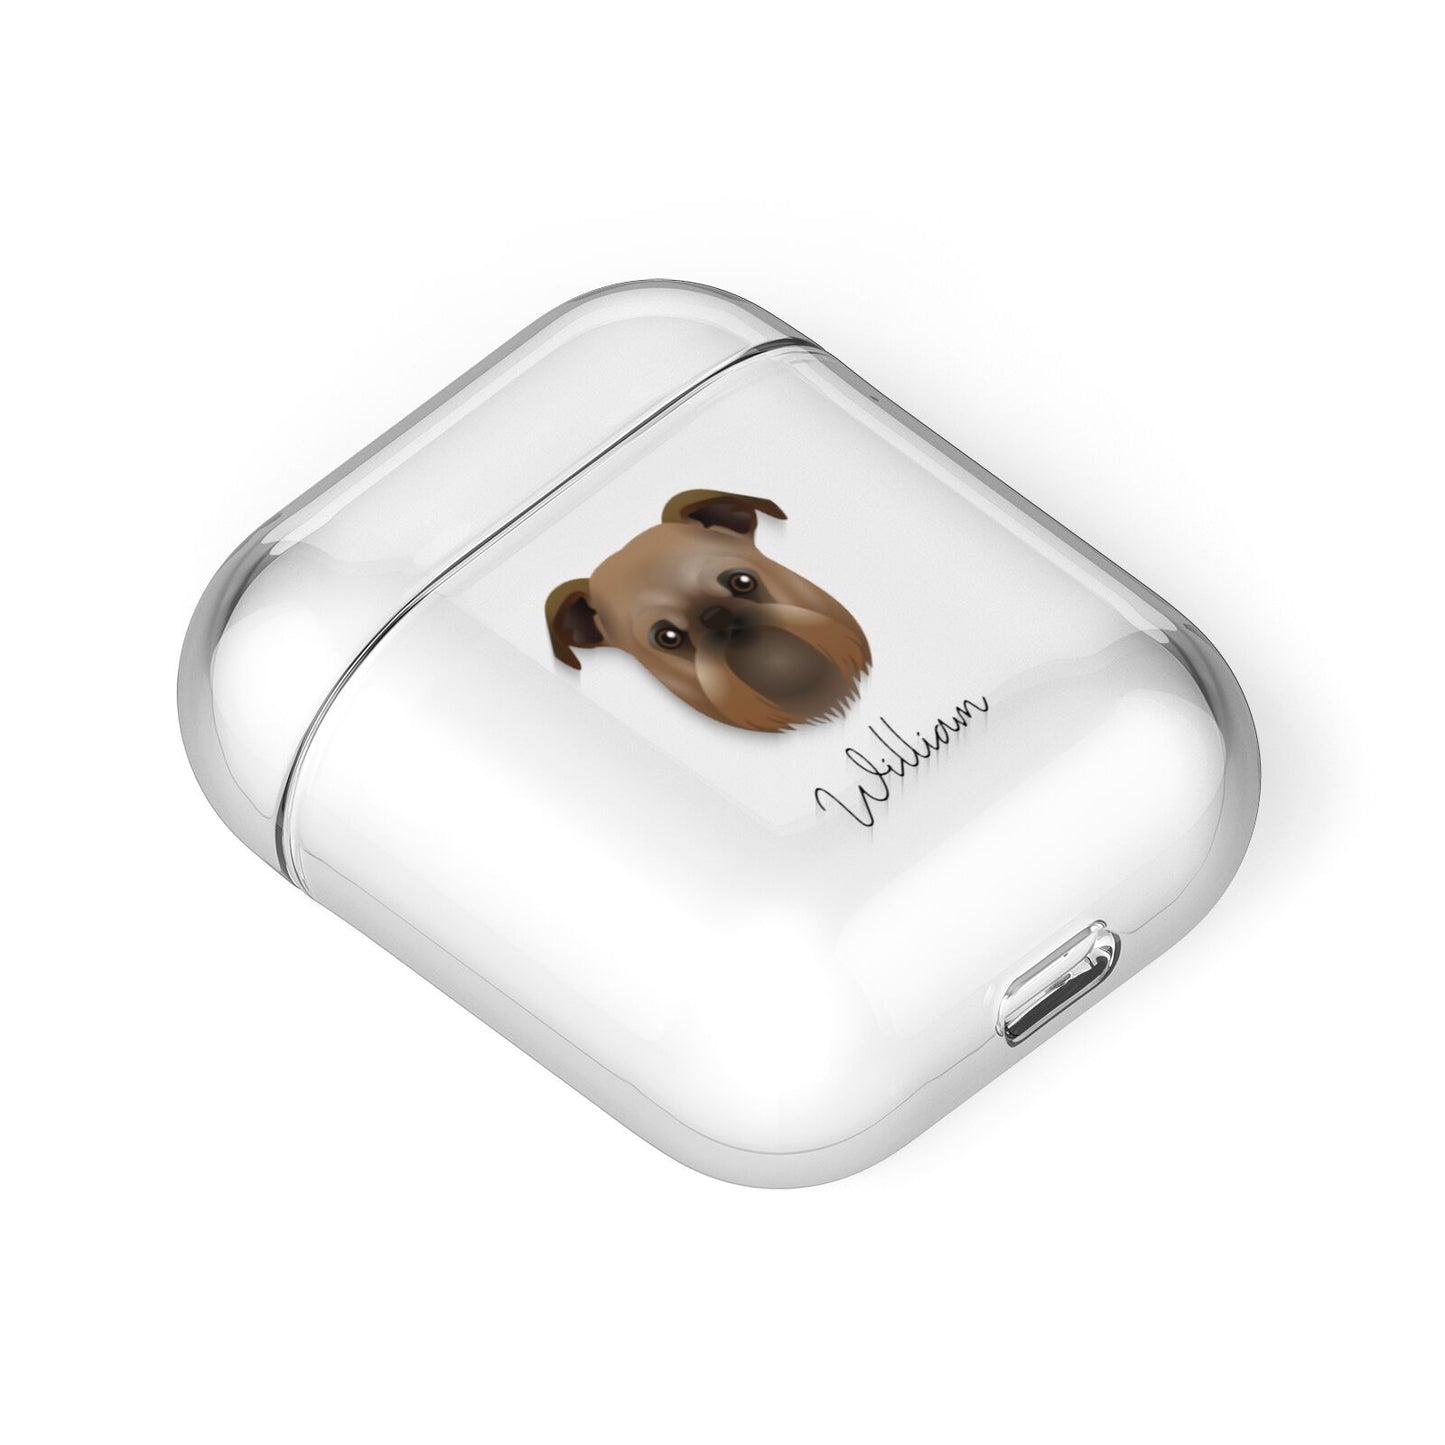 Griffon Bruxellois Personalised AirPods Case Laid Flat